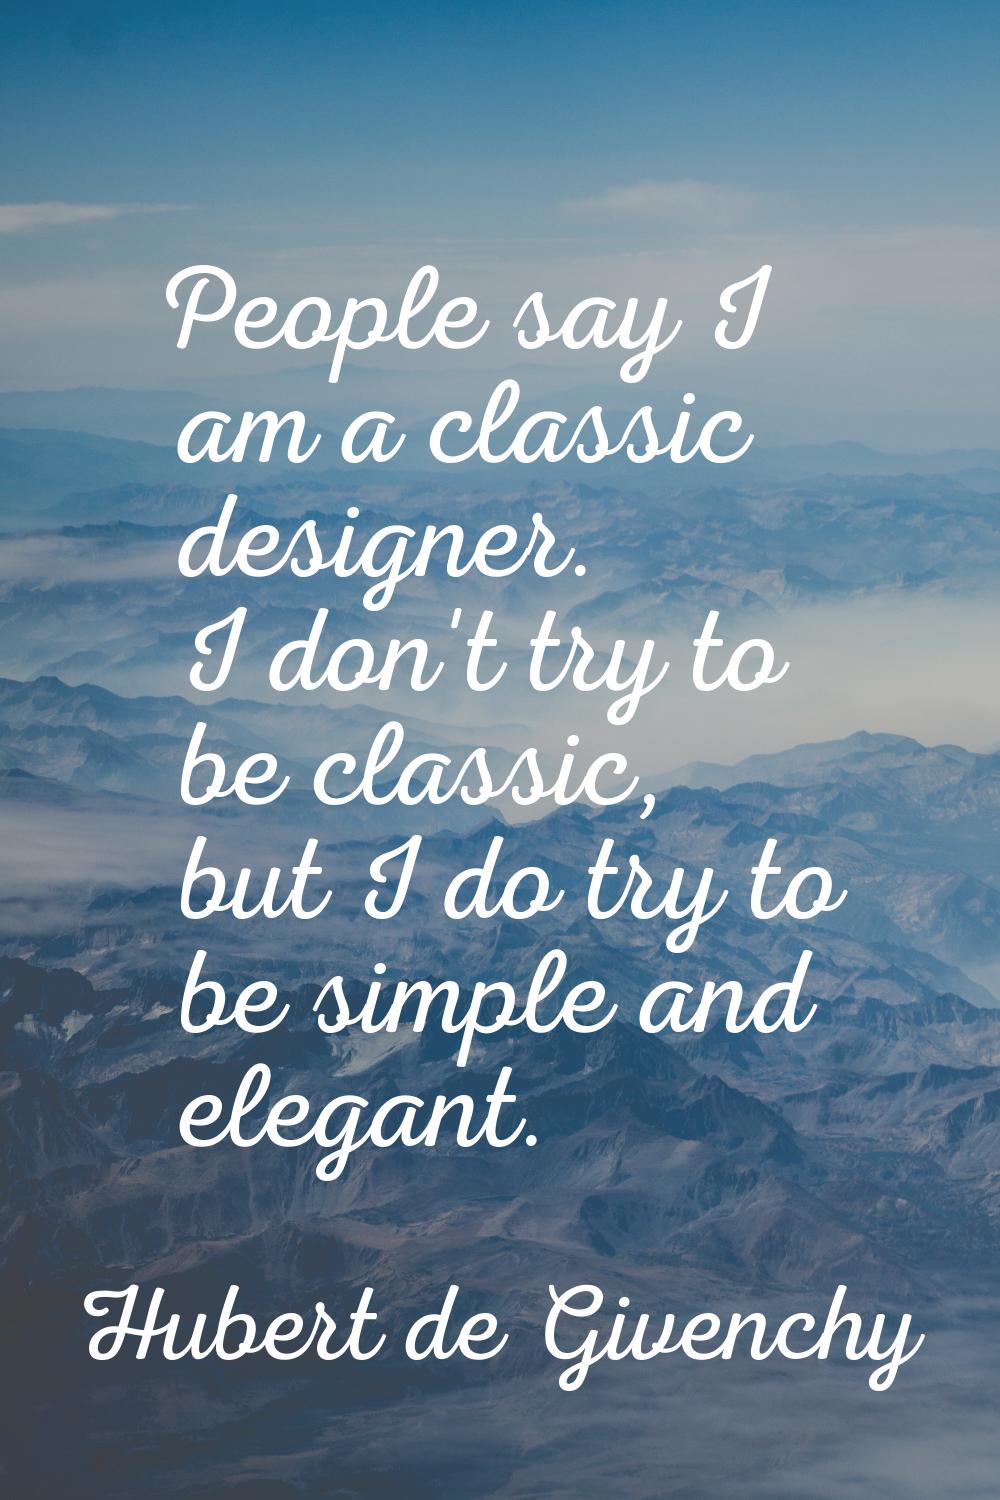 People say I am a classic designer. I don't try to be classic, but I do try to be simple and elegan